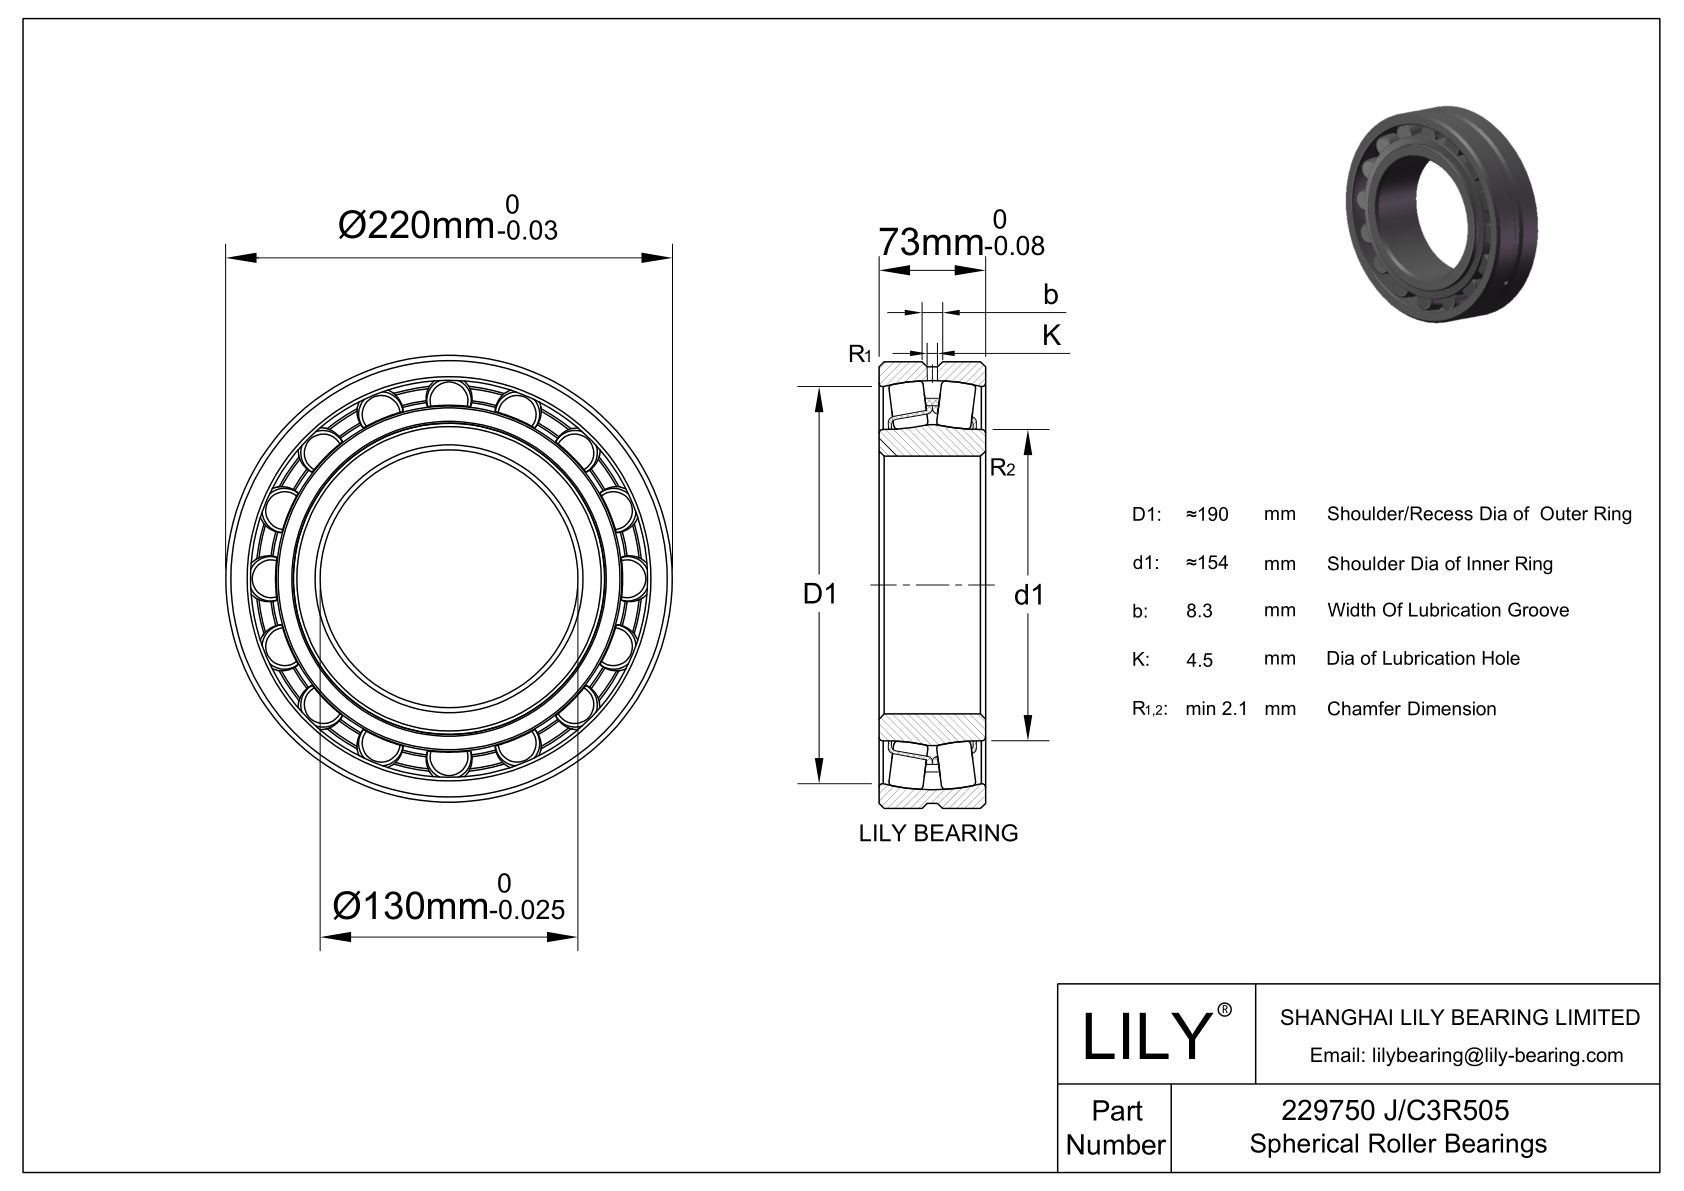 229750 J/C3R505 Double Row Spherical Roller Bearing cad drawing